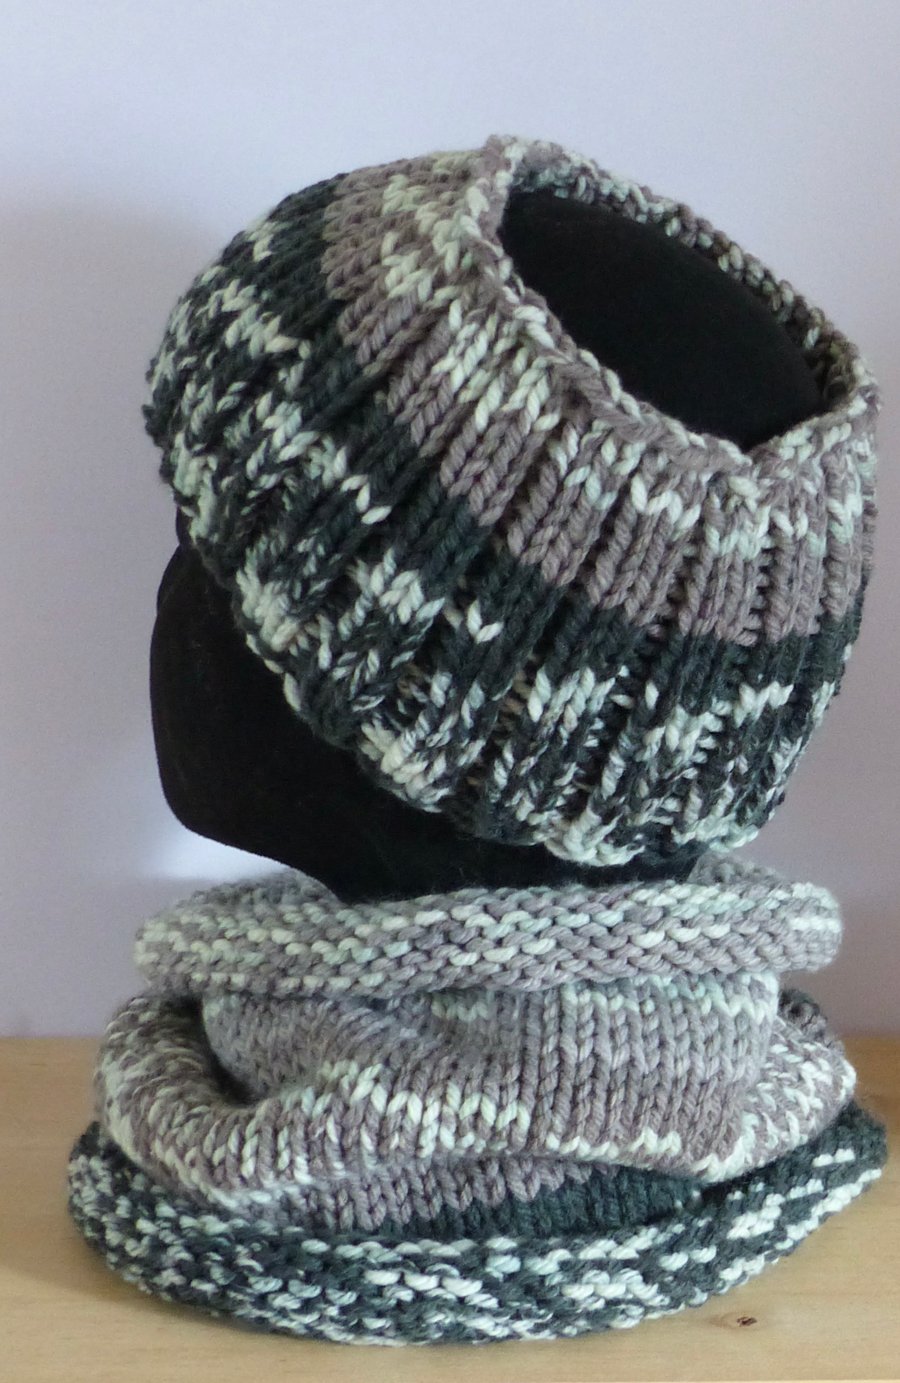 Knitted 'Nordic' Cowl & Headband